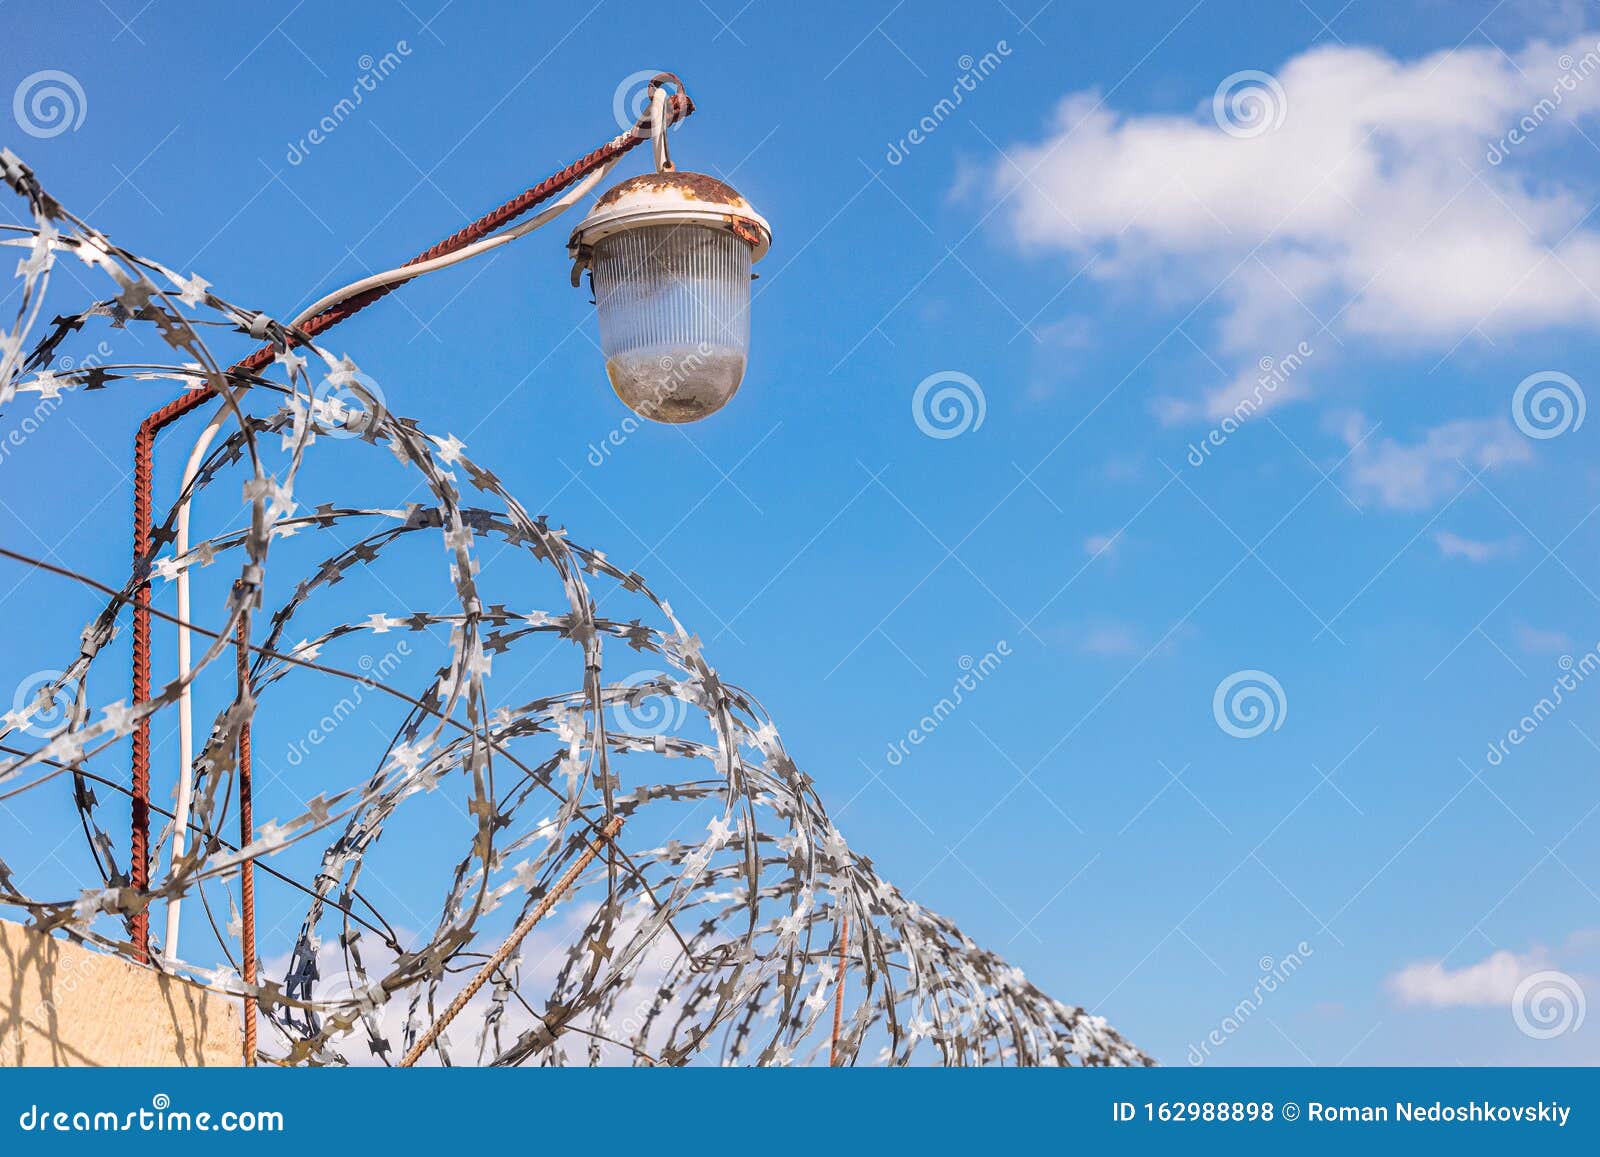 barbwire on a blue sky background